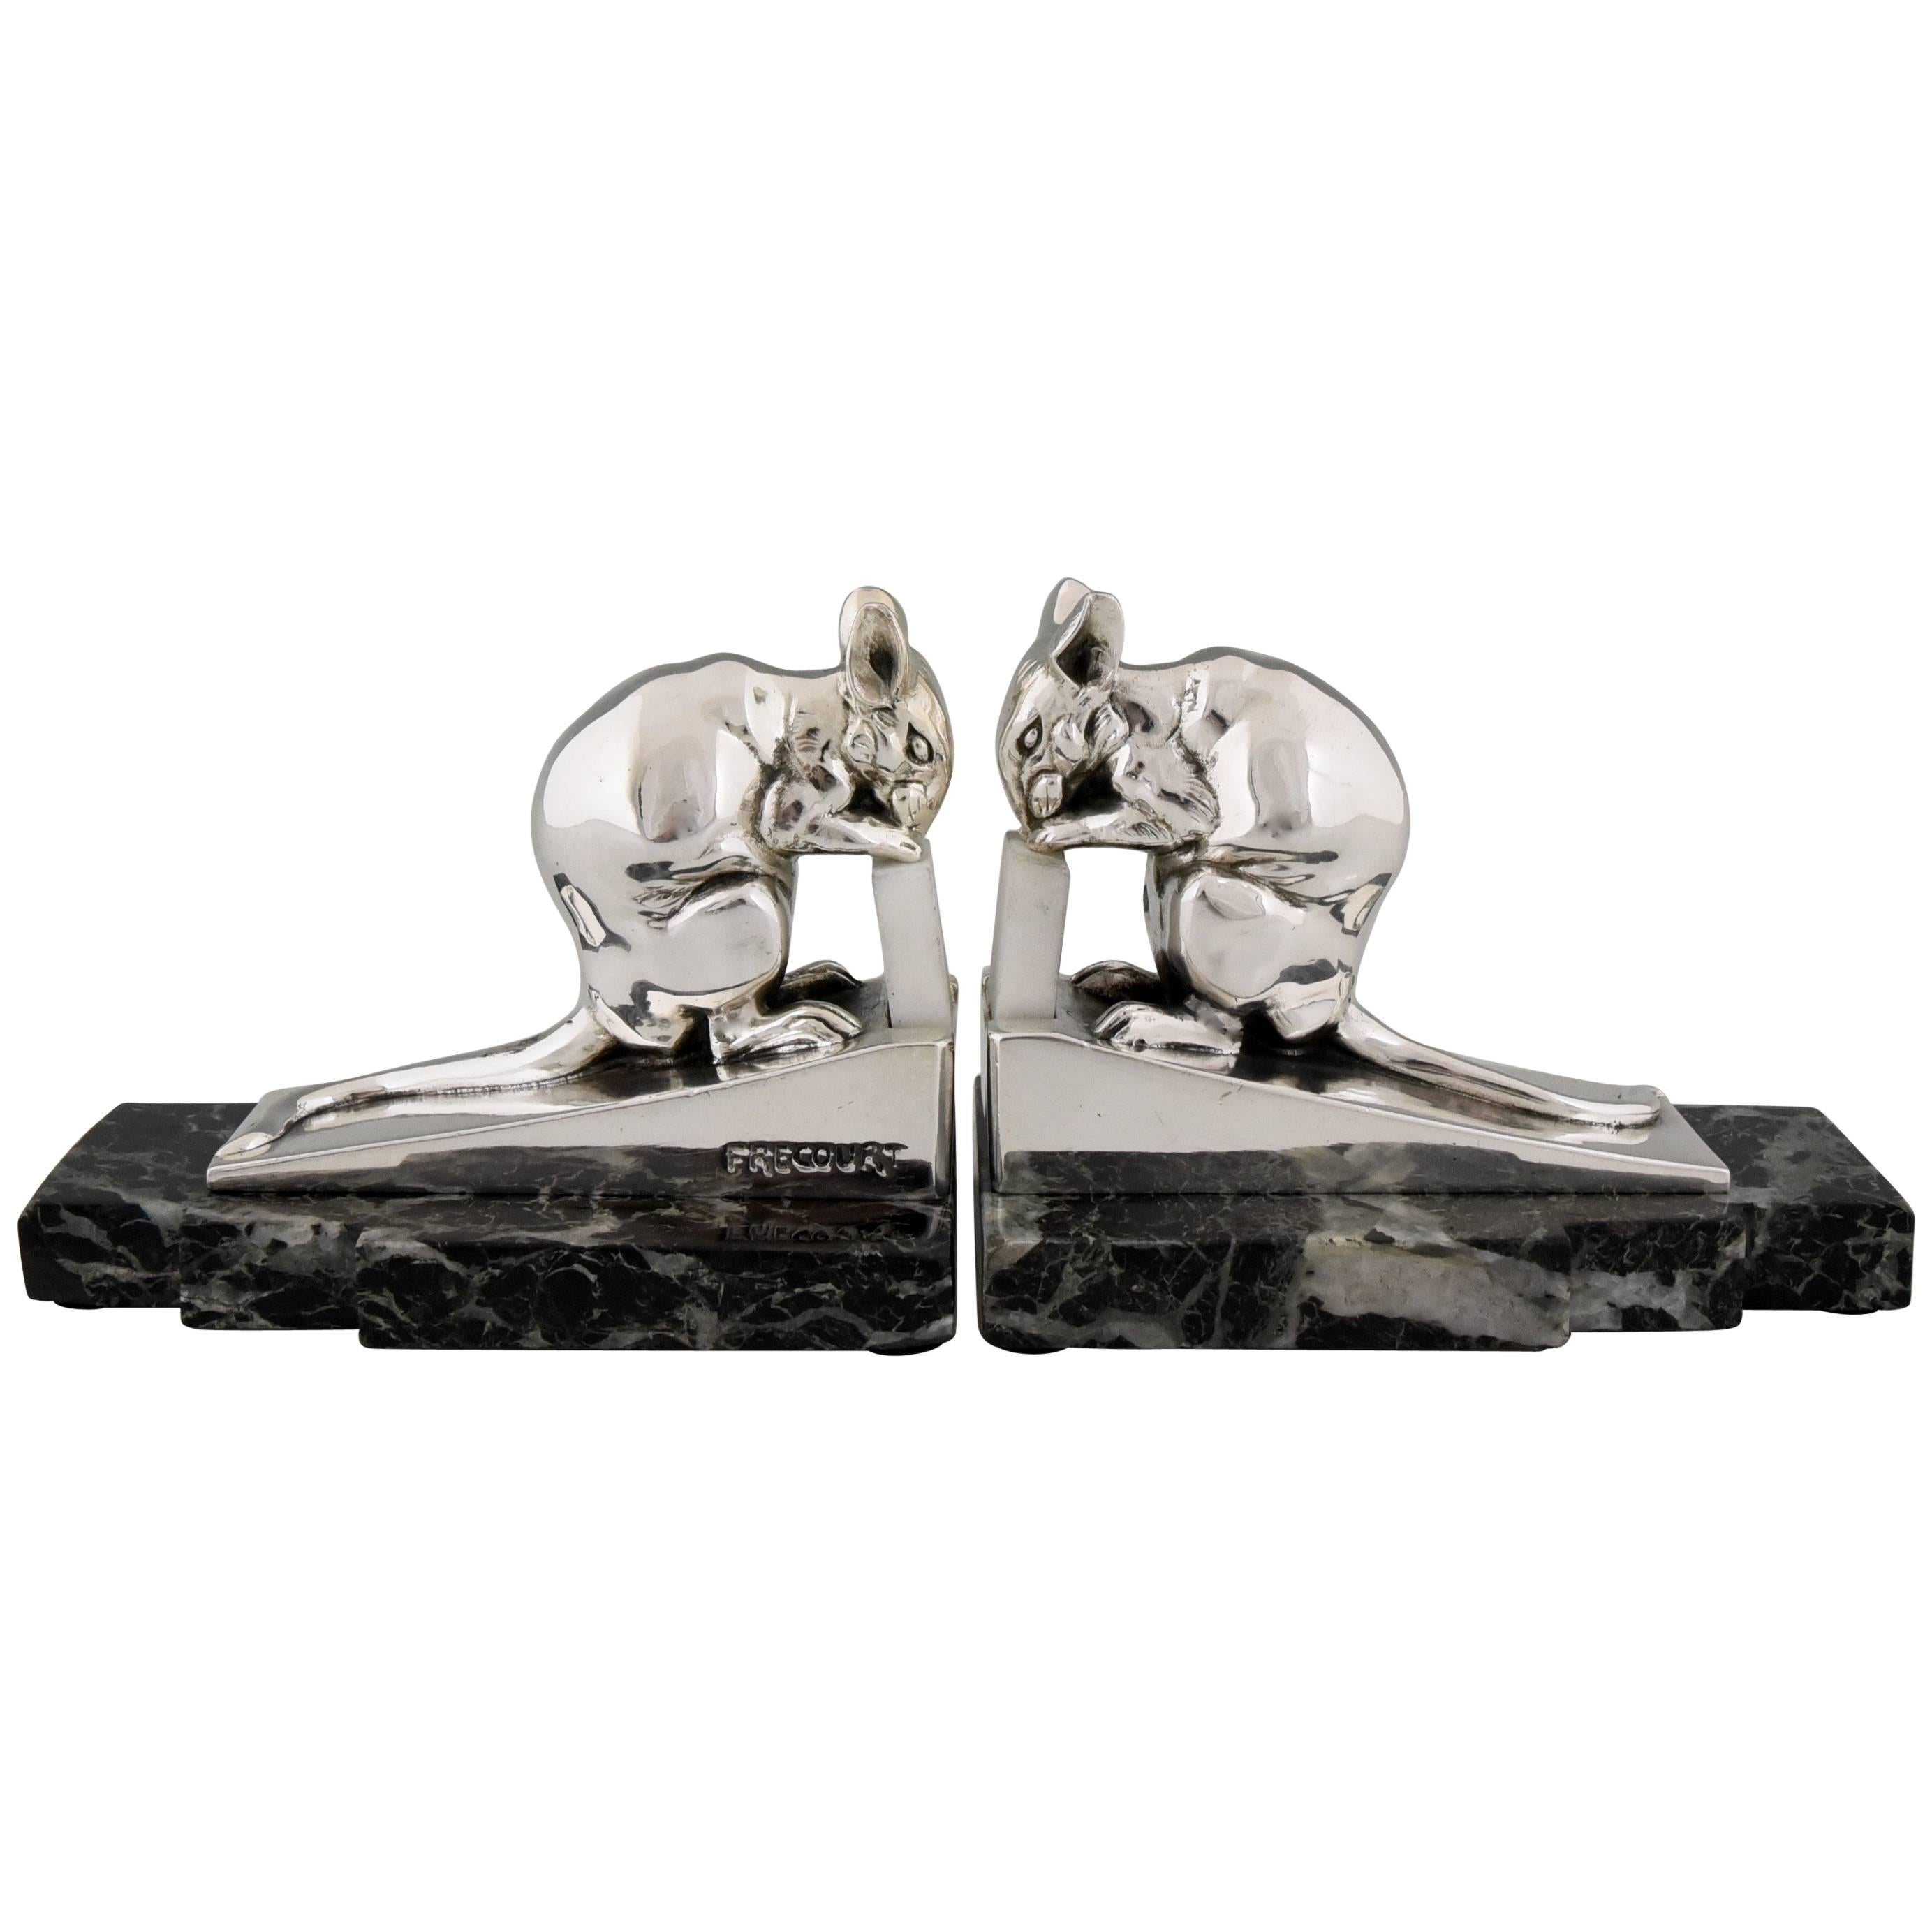 French Art Deco Slivered Mouse Bookends by Frecourt, 1930